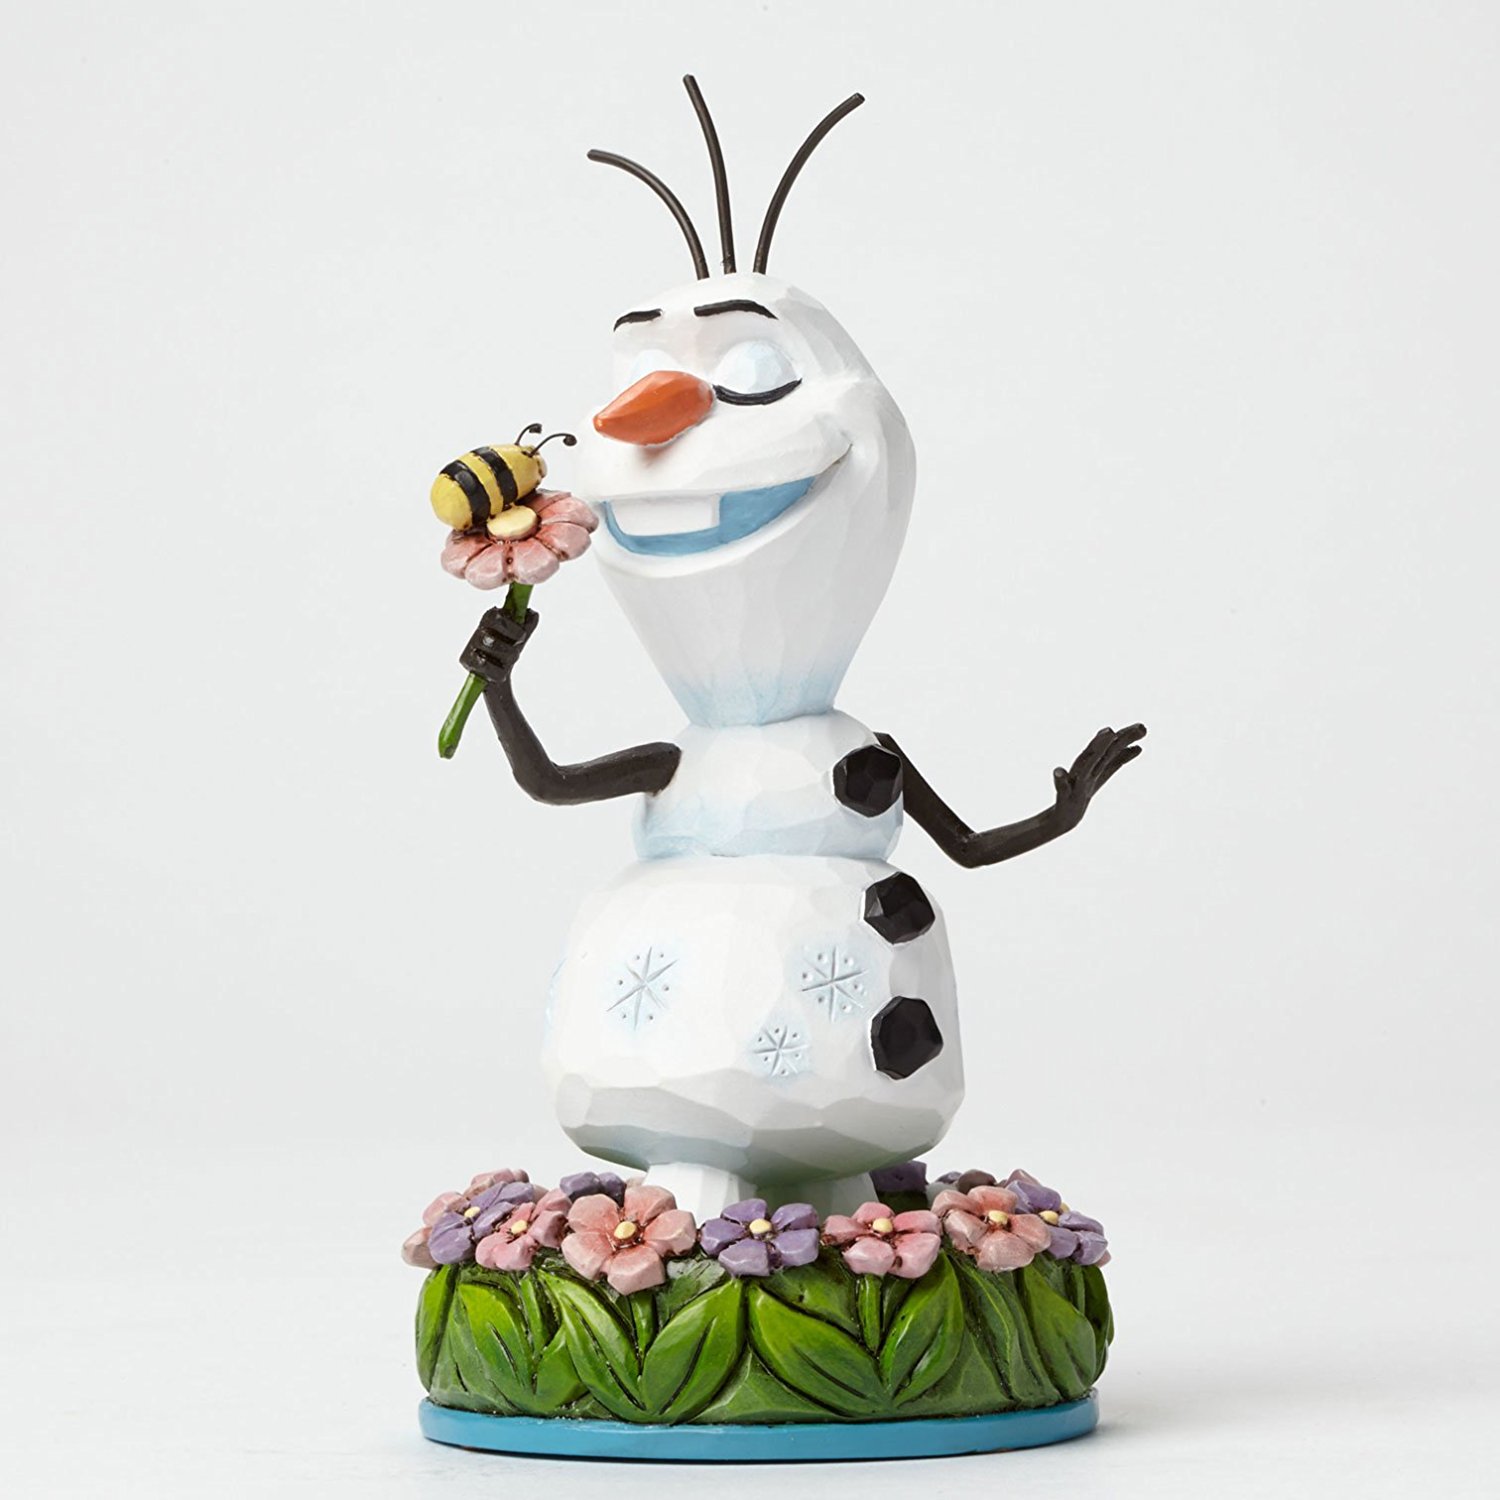 Disney Traditions Olaf with Flower Figurine: Amazon.co.uk: Kitchen ...